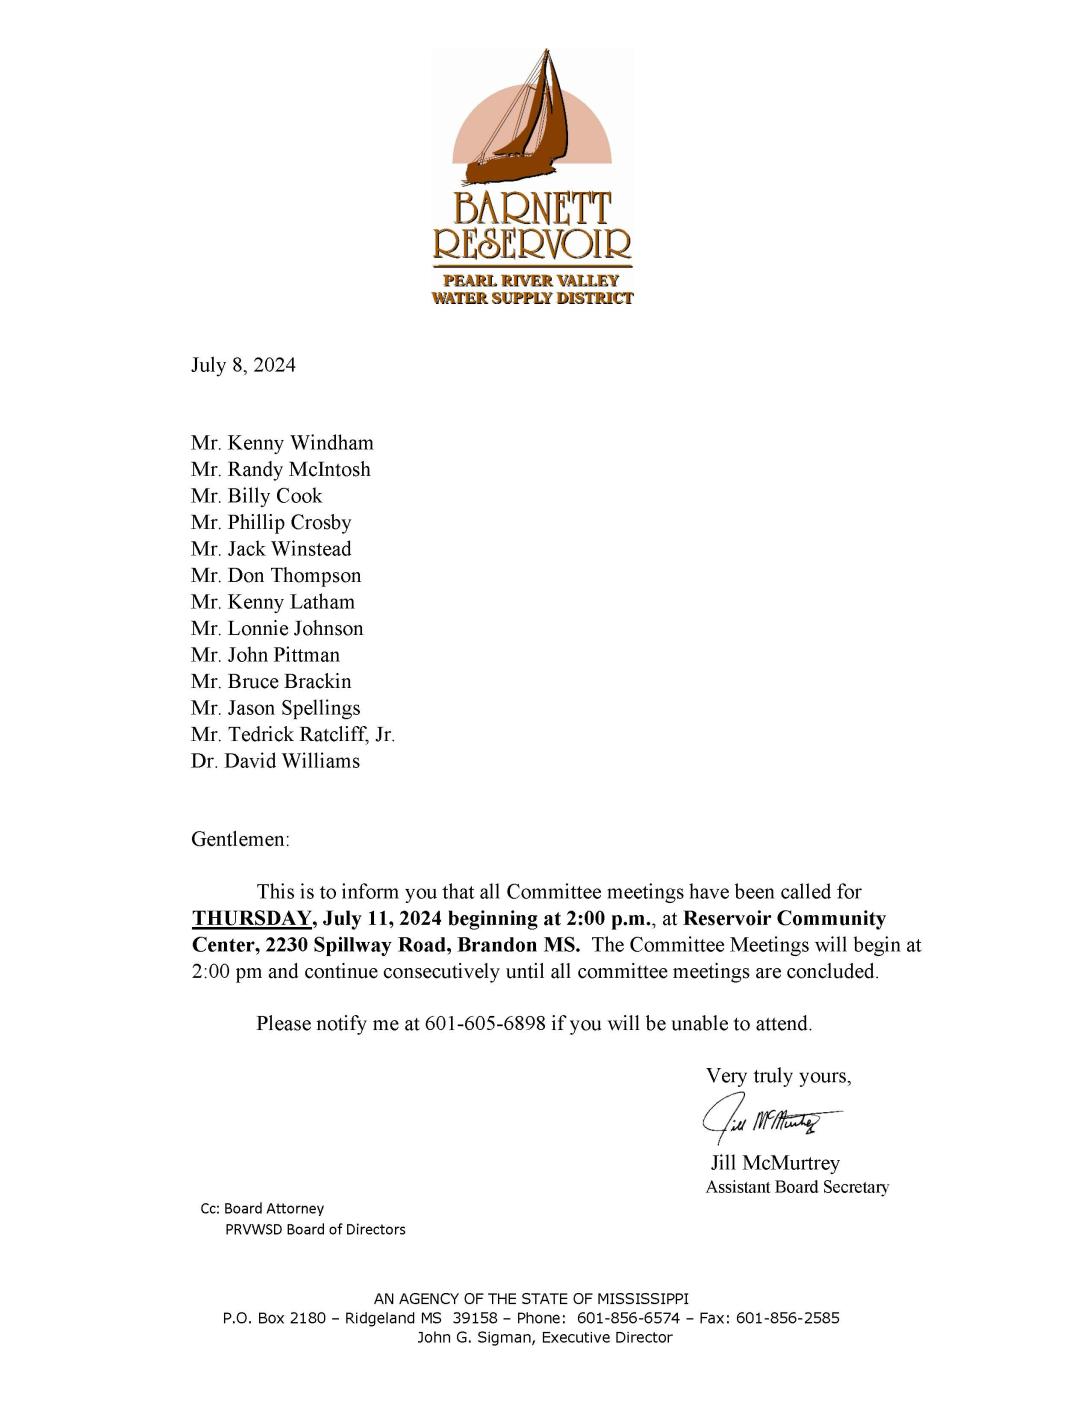 July 2024 Committee Meeting Call Letter